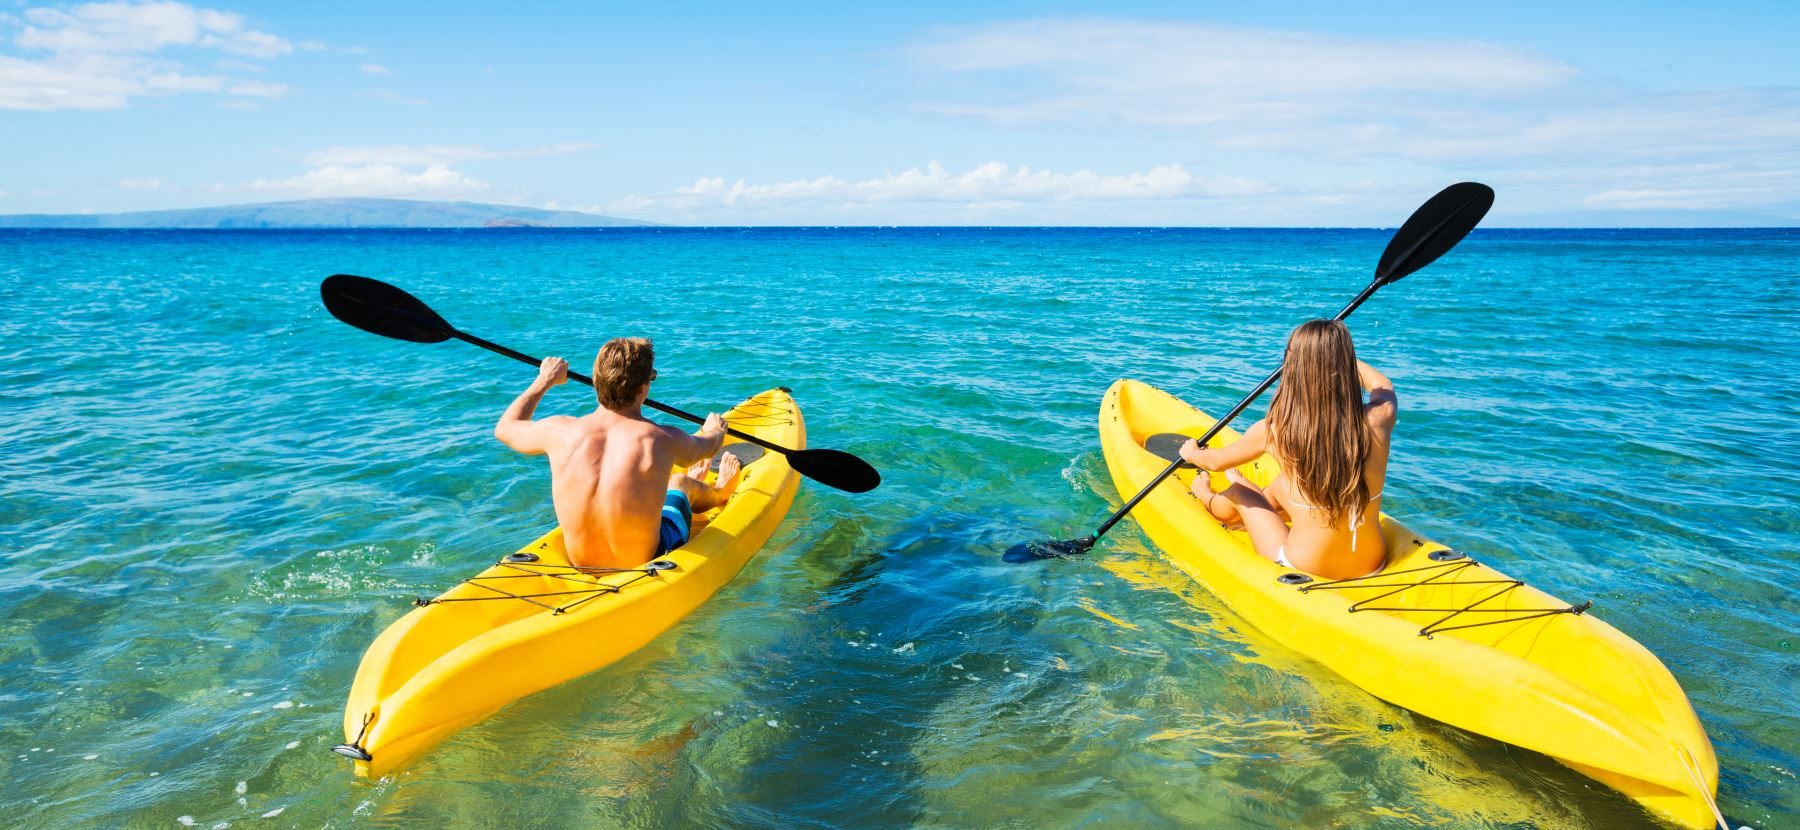 Couple Kayaking in the Ocean on Vacation